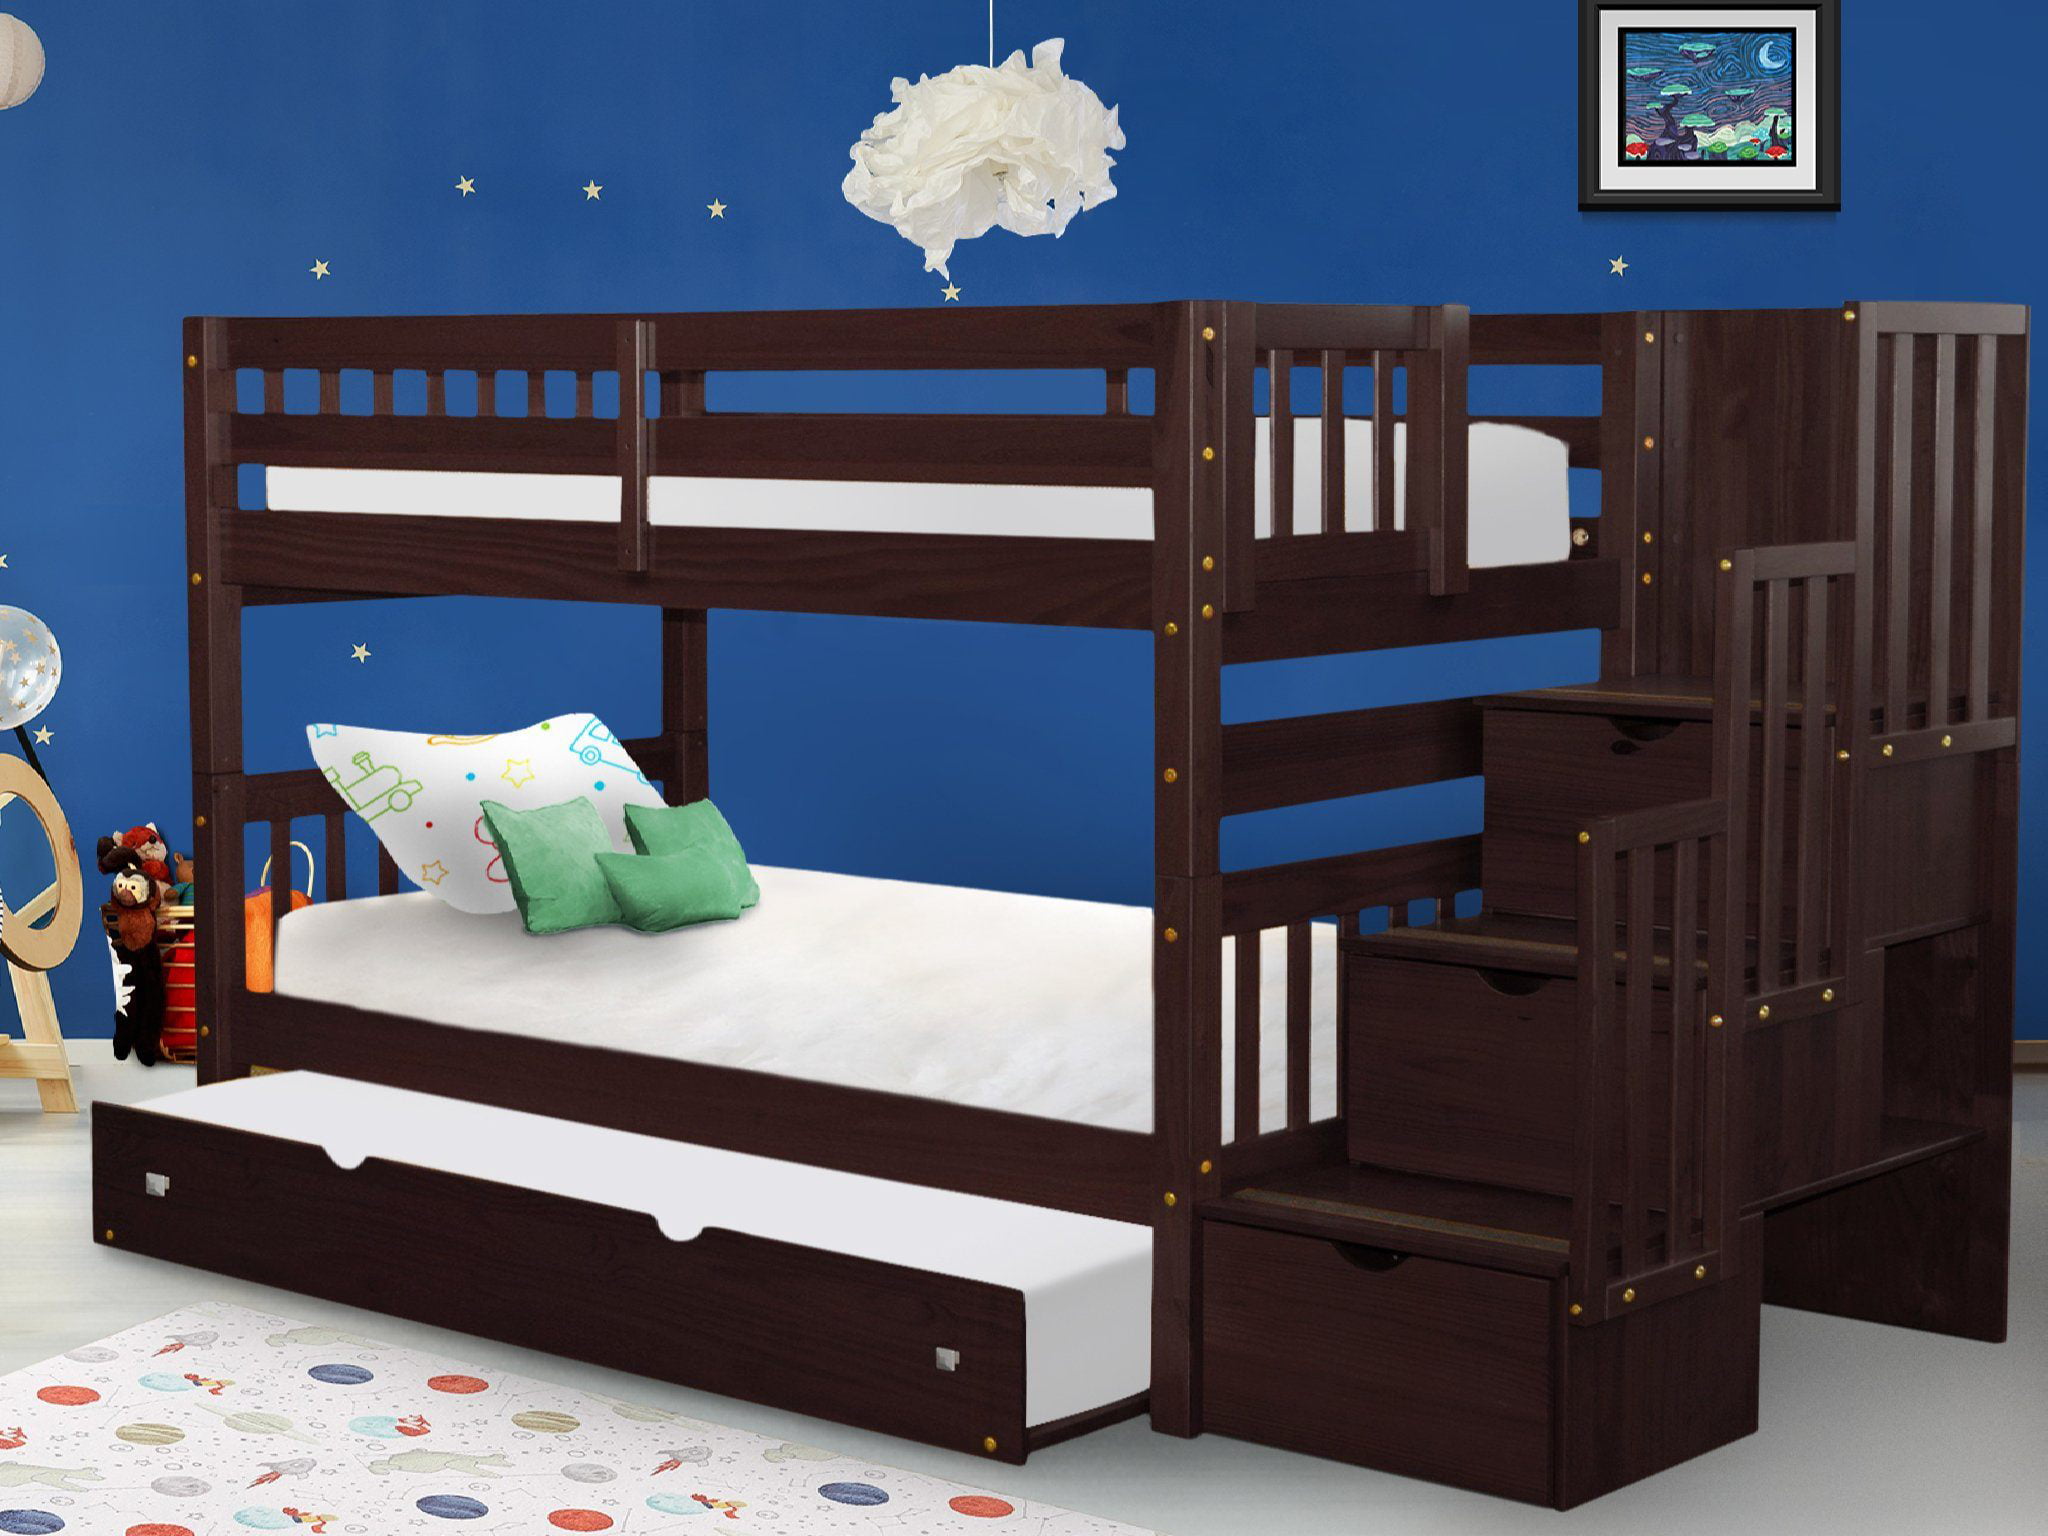 Bedz King Stairway Bunk Beds Twin Over, Twin Over Bunk Bed With Trundle And Staircase